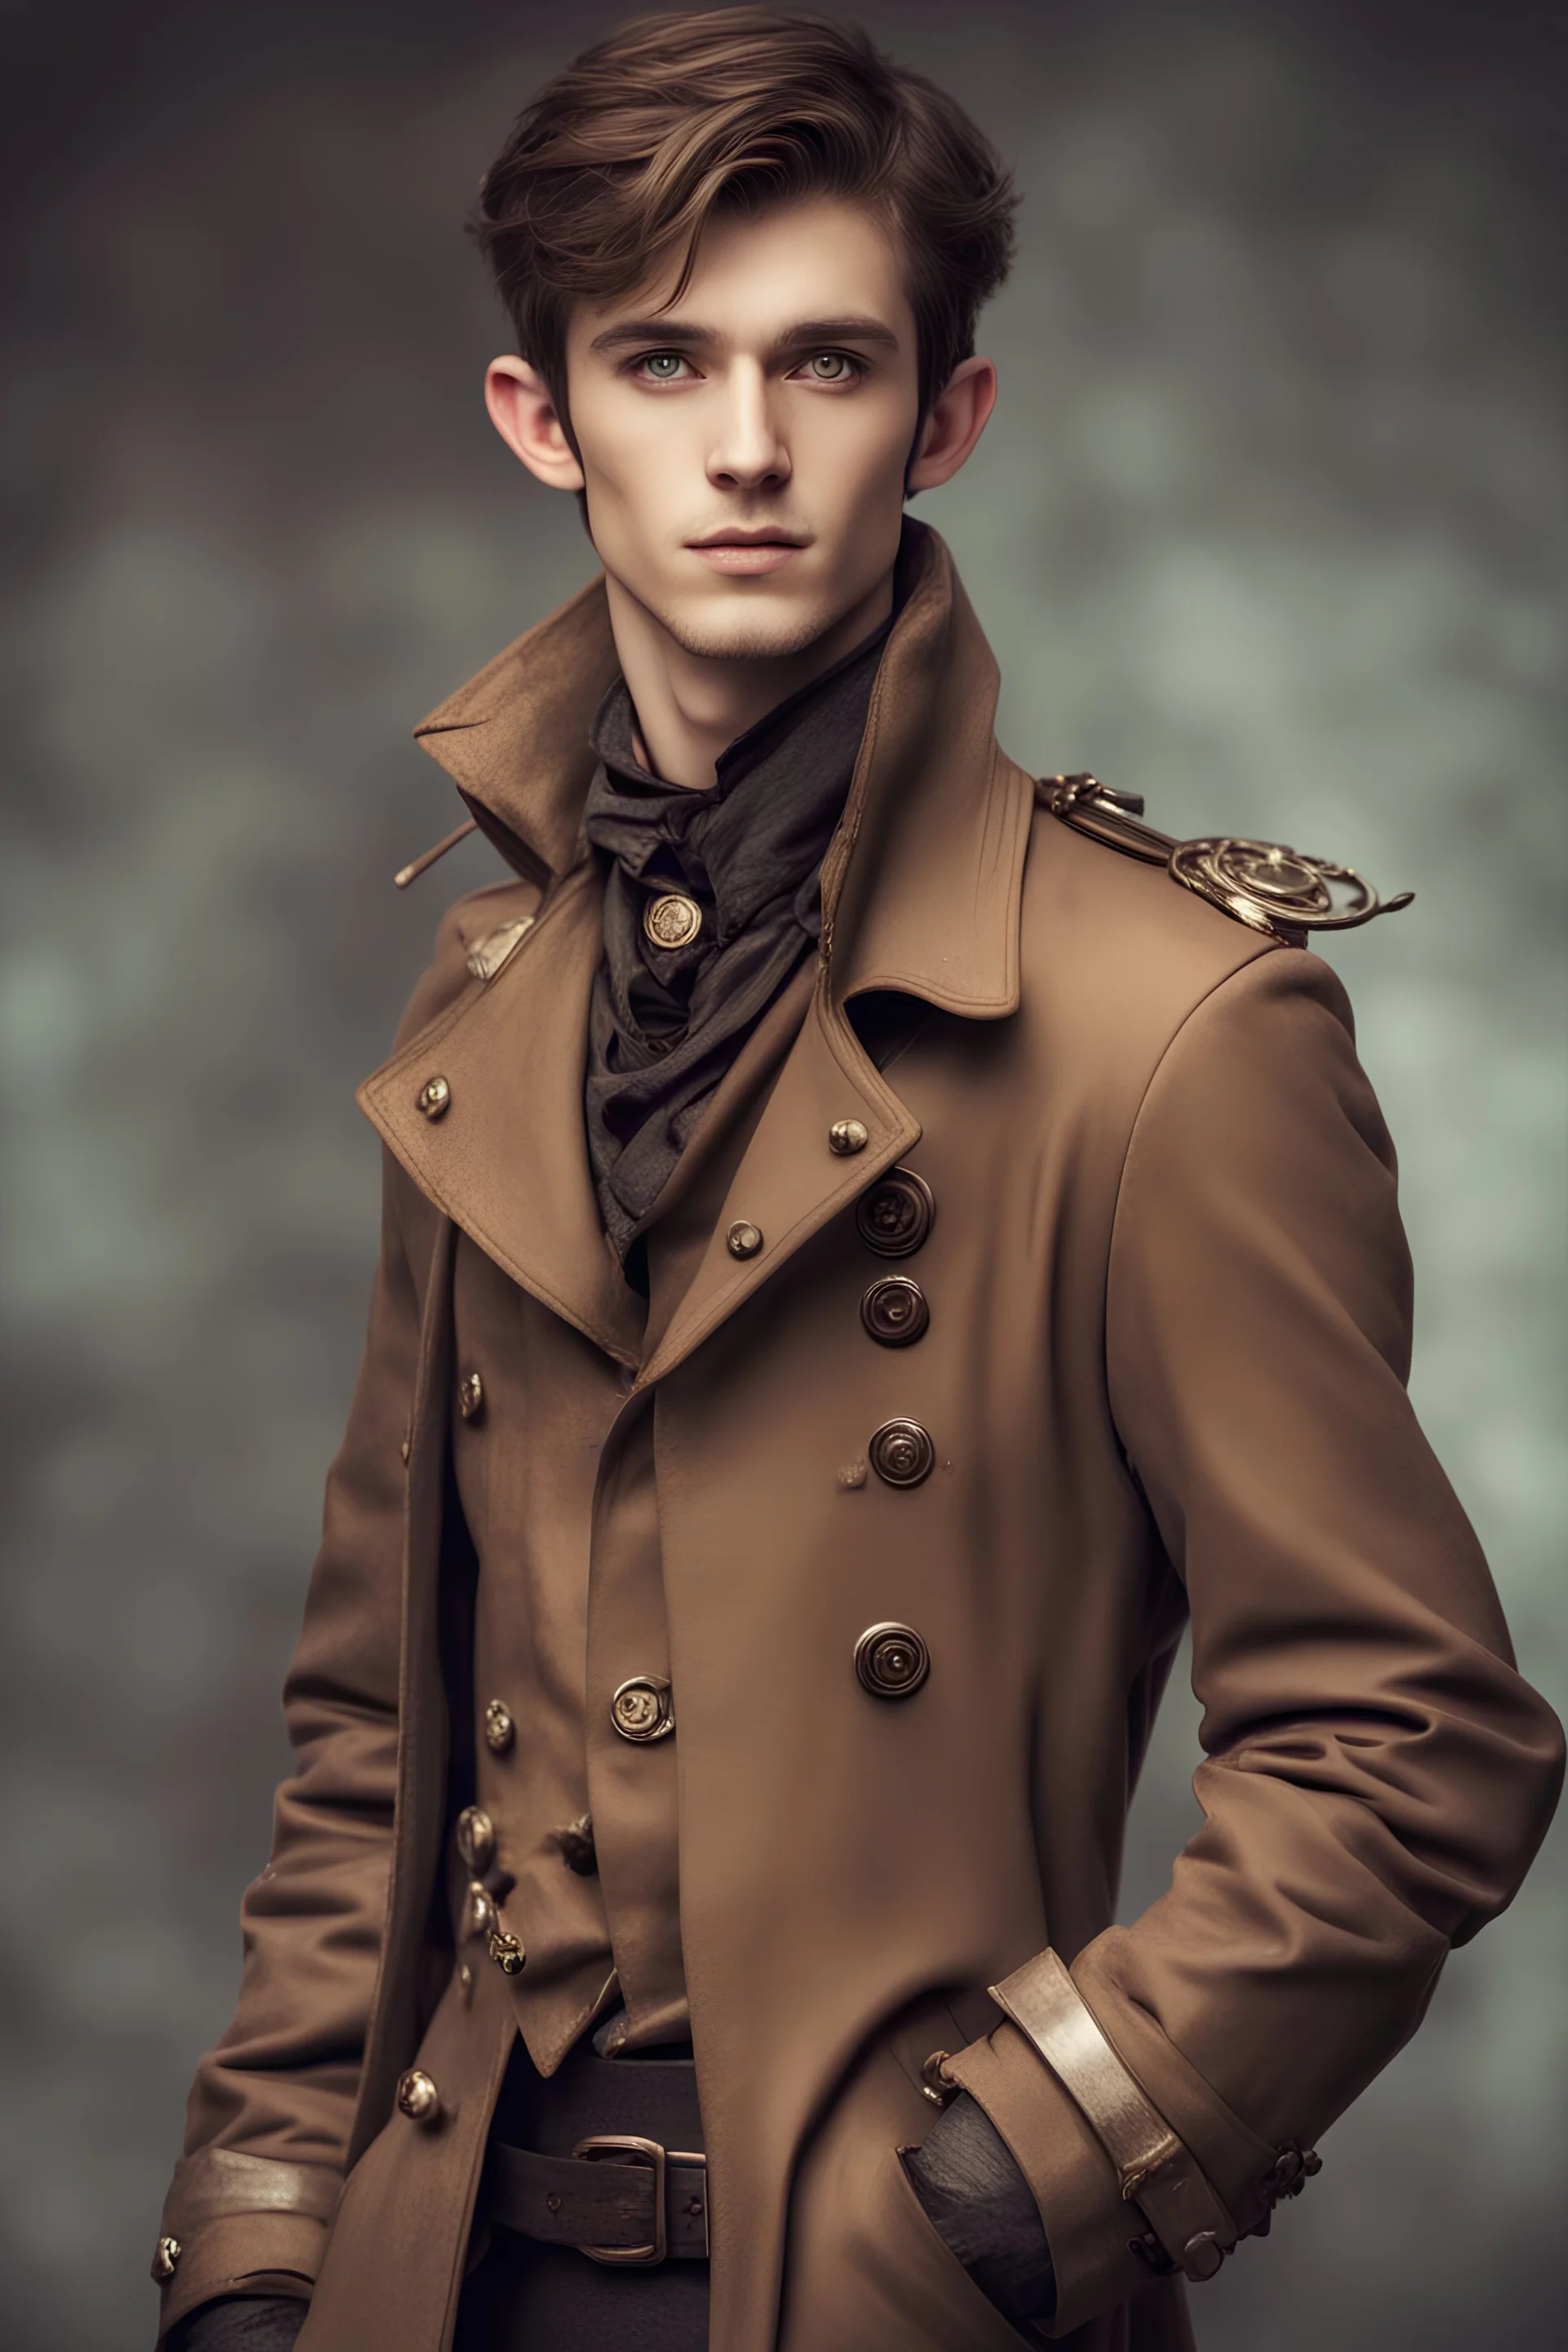 handsome elf man of twenty years old, with brown eyes, short brown hair, dressed in a steampunk style trench coat.